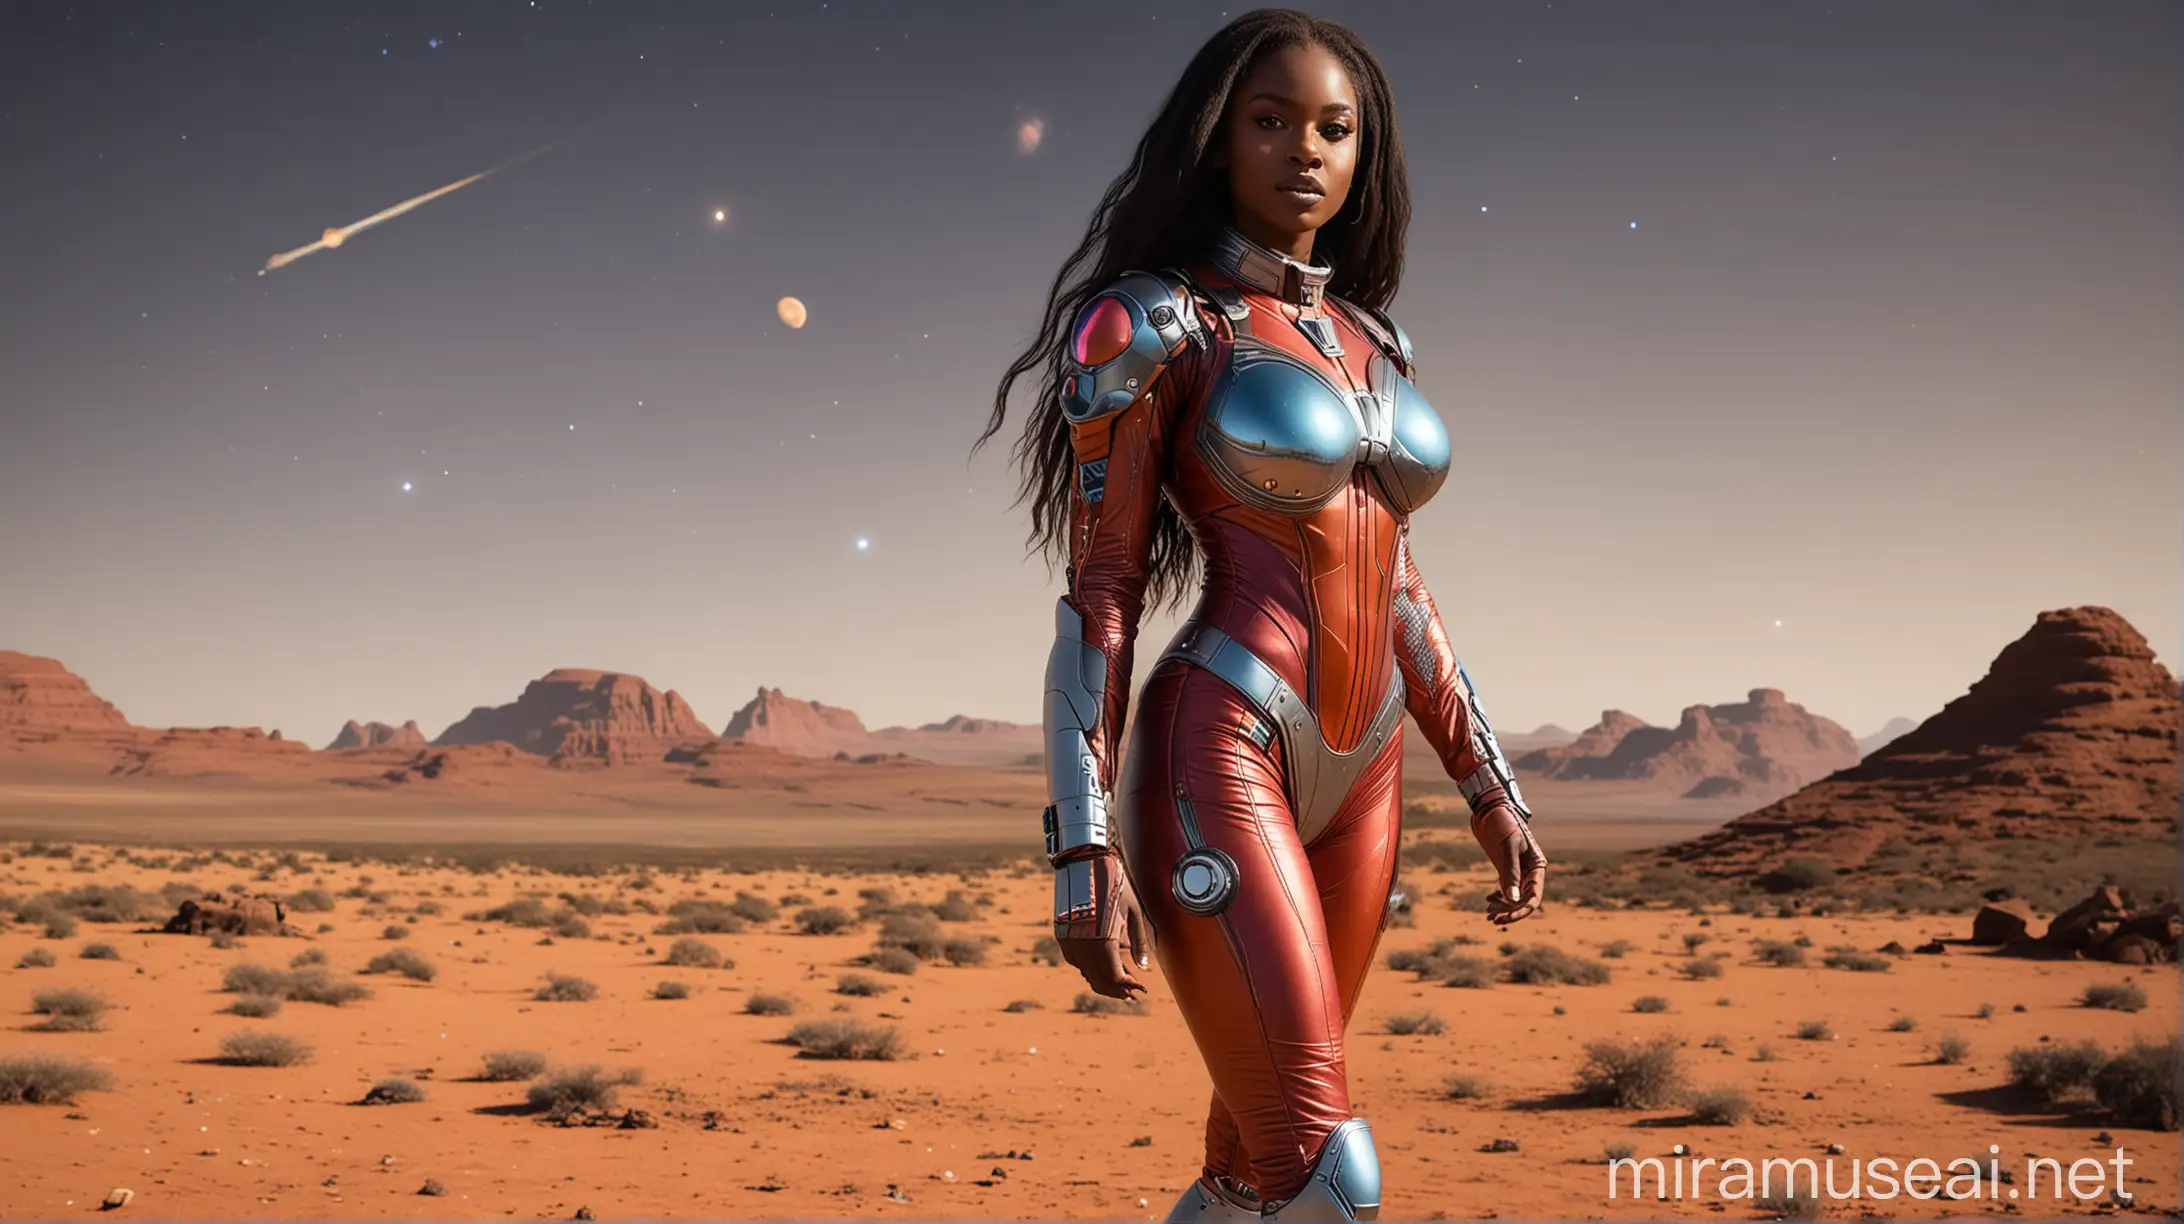 African Fitness Model Welcomes Visitors in Vibrant SciFi Spacesuit